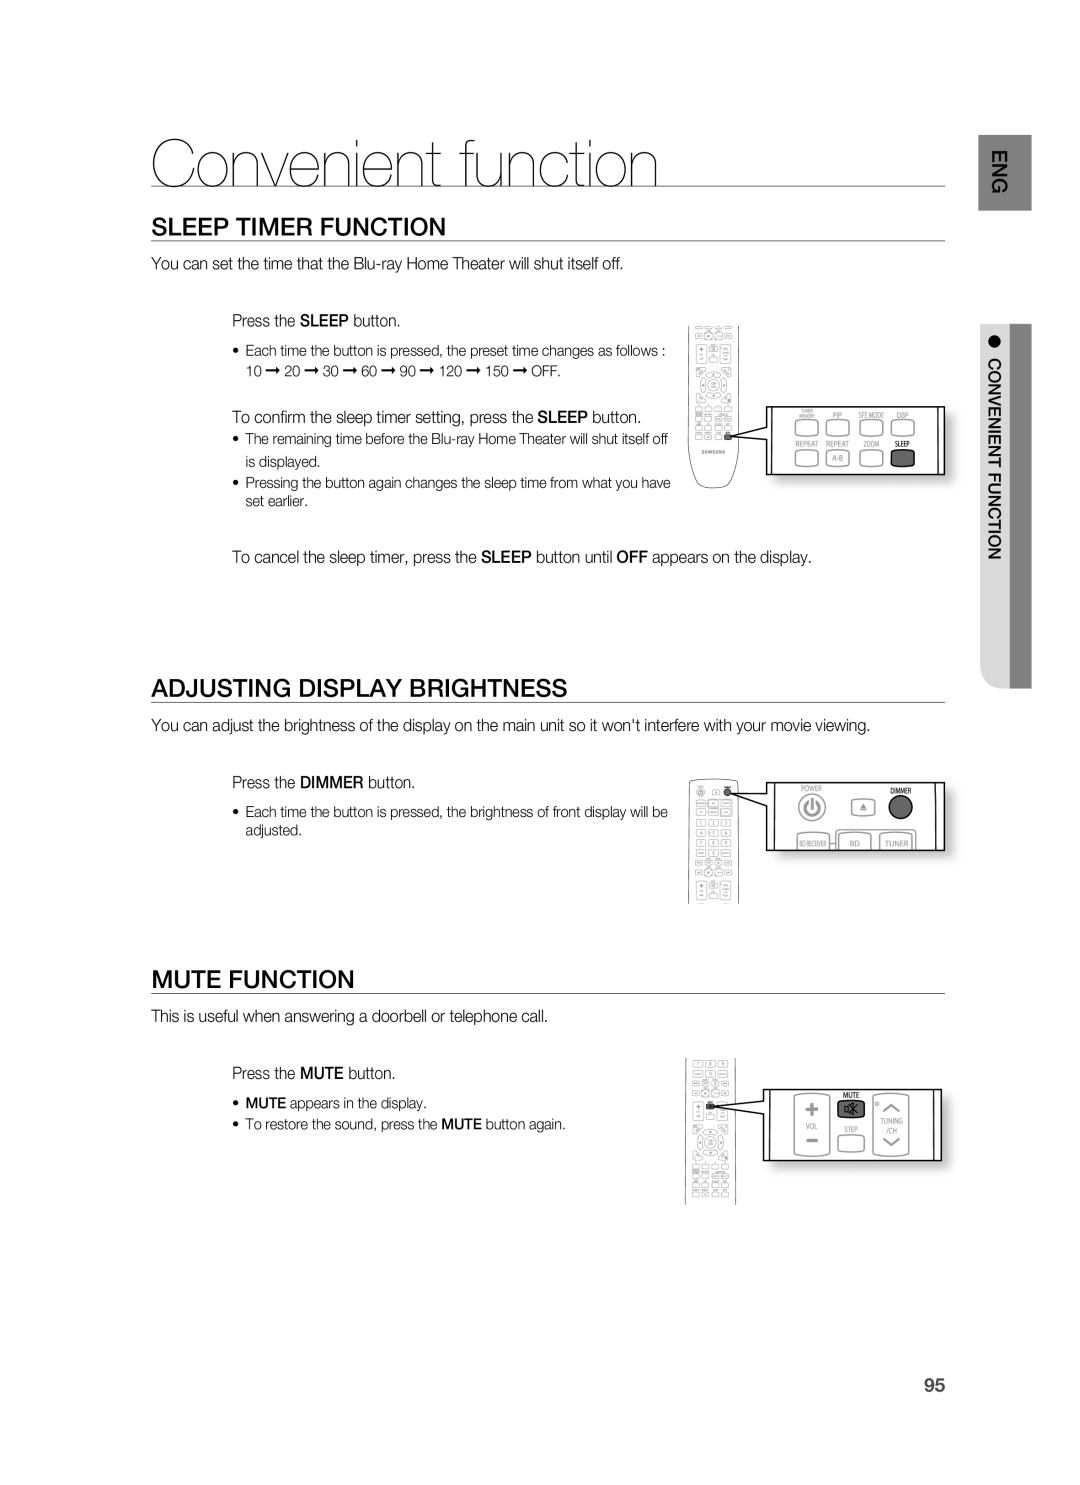 Samsung HT-BD3252A, AH68-02231A Convenient function, Sleep Timer Function, Adjusting Display Brightness, Mute Function 